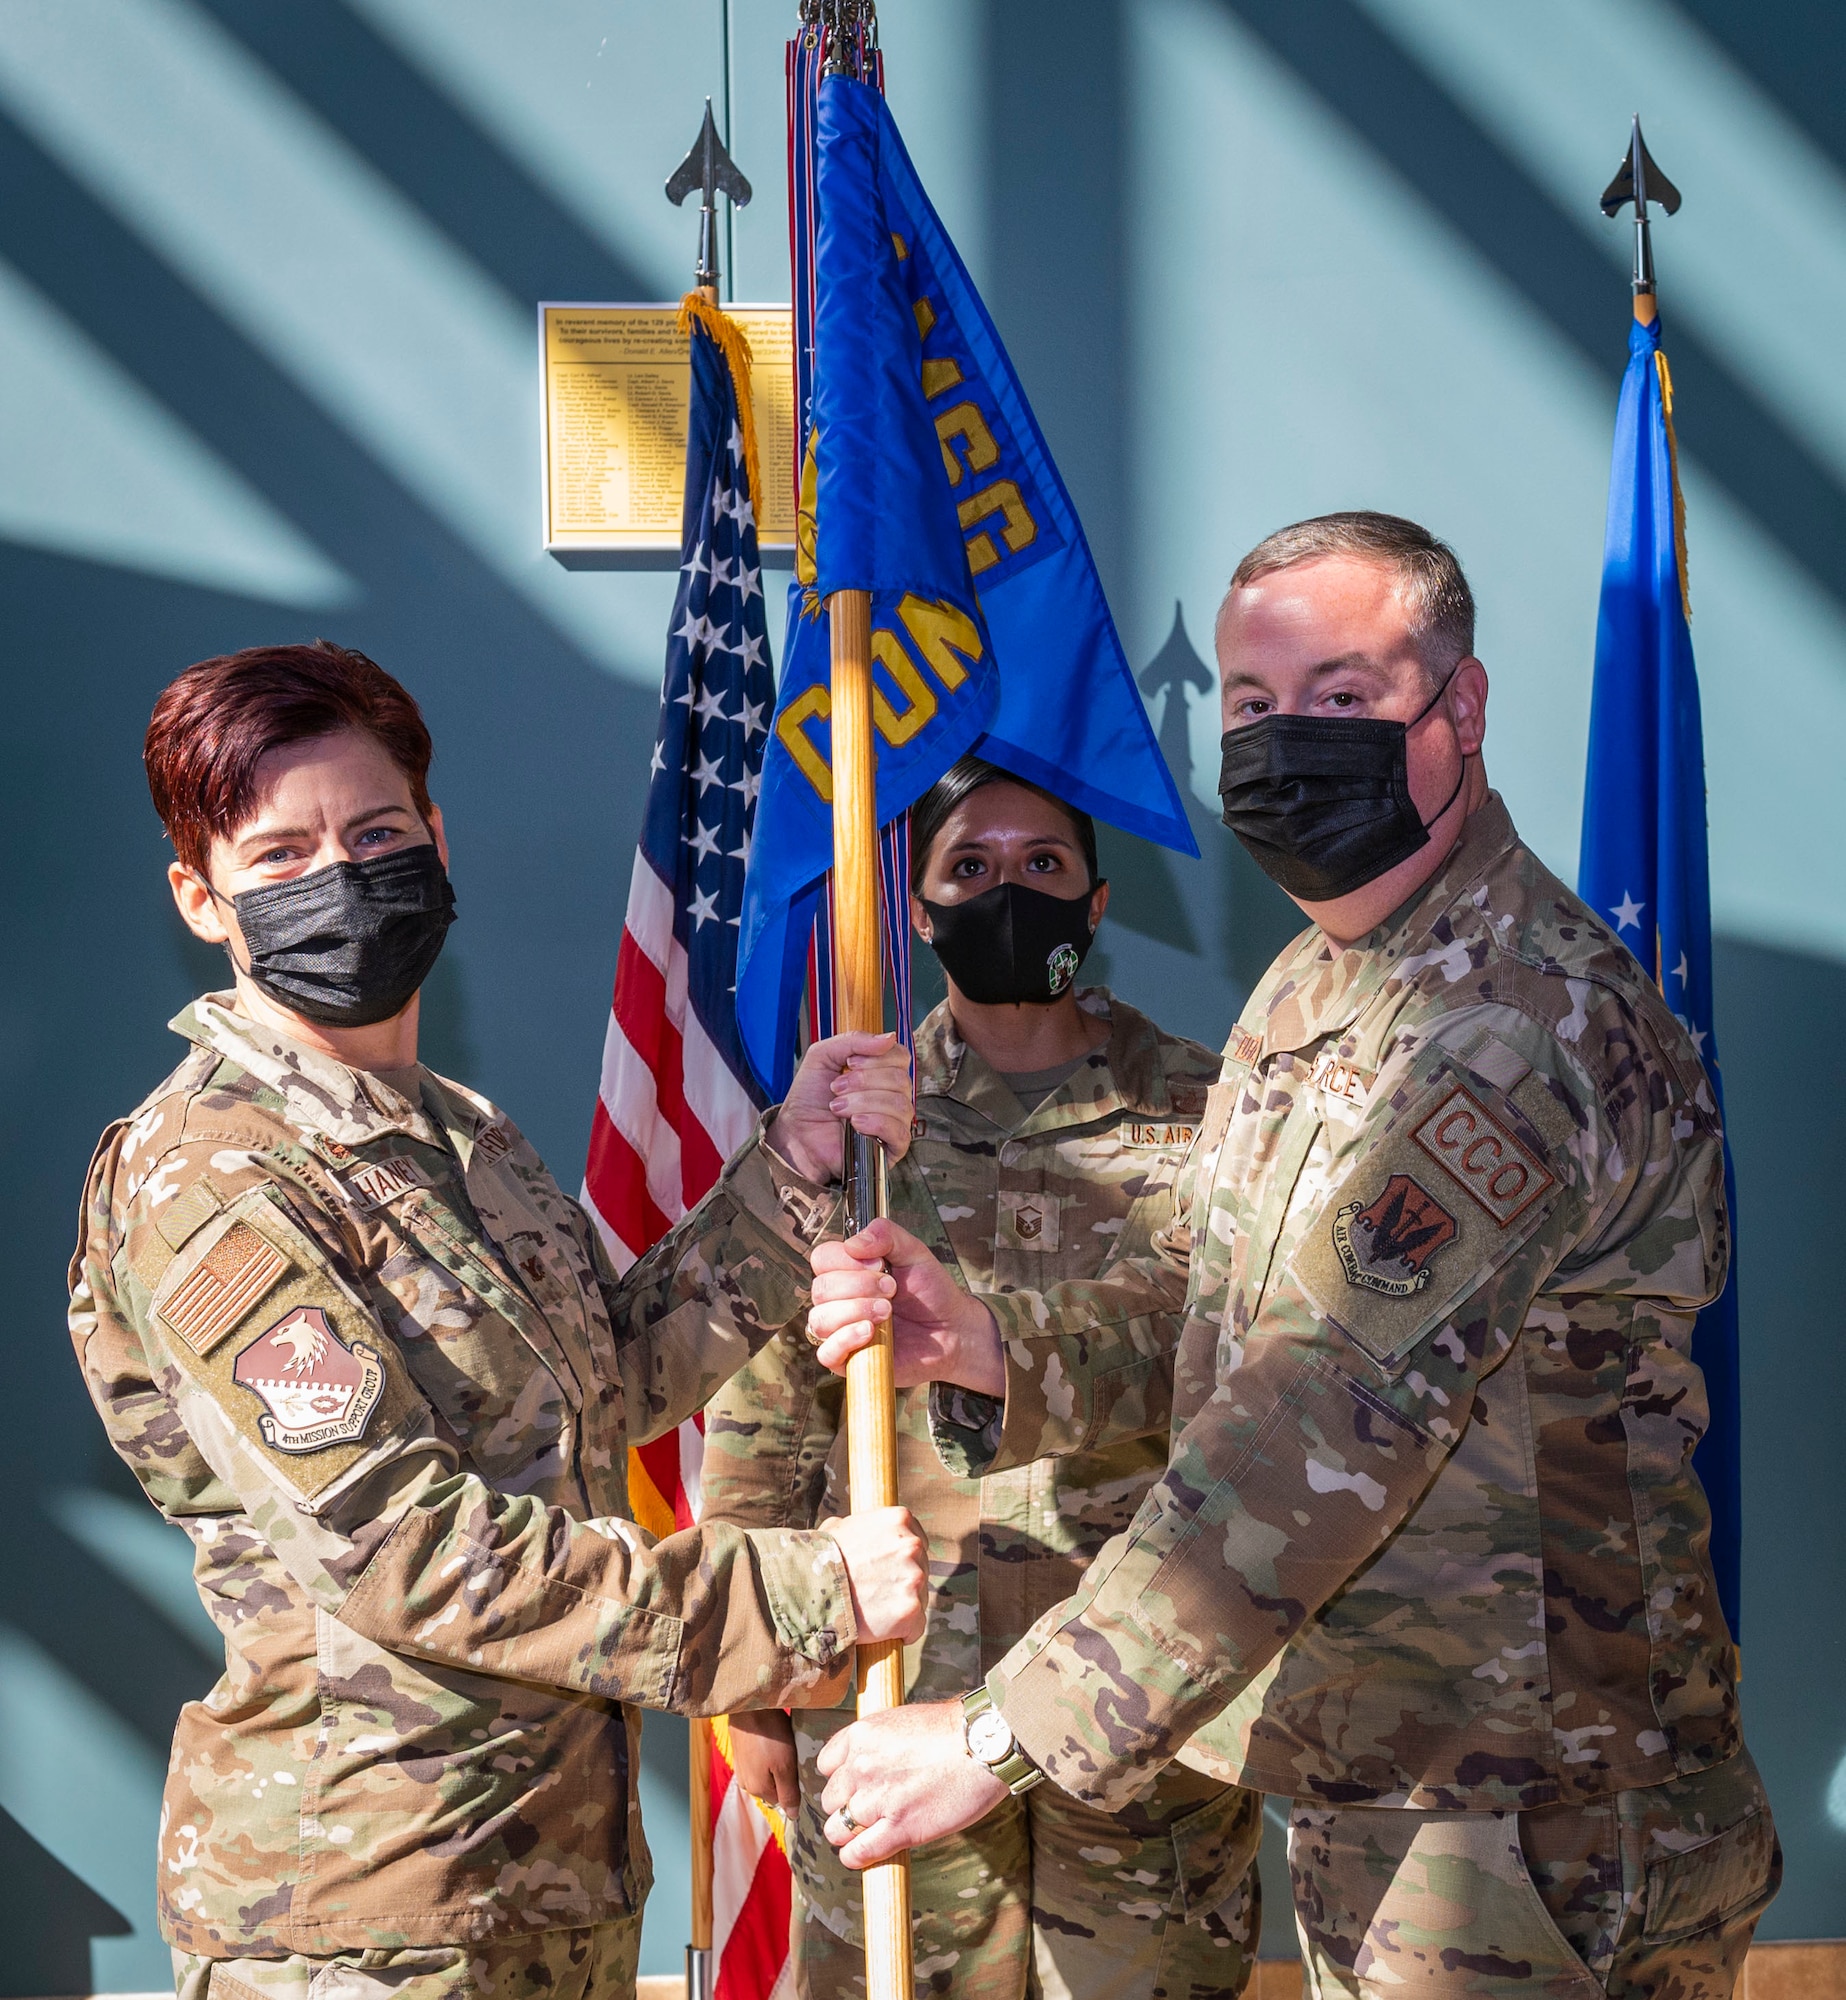 Col. Tammy McElhaney, 4th Mission Support Group commander, passes the guidon to Lt. Col. Steven Fletcher, incoming 4th Contracting Squadron commander, during a change of command ceremony at Seymour Johnson Air Force Base, North Carolina, July 29, 2022. Fletcher has served as a career contracting officer across four major commands. (U.S. Air Force photo by Airman 1st Class Sabrina Fuller)